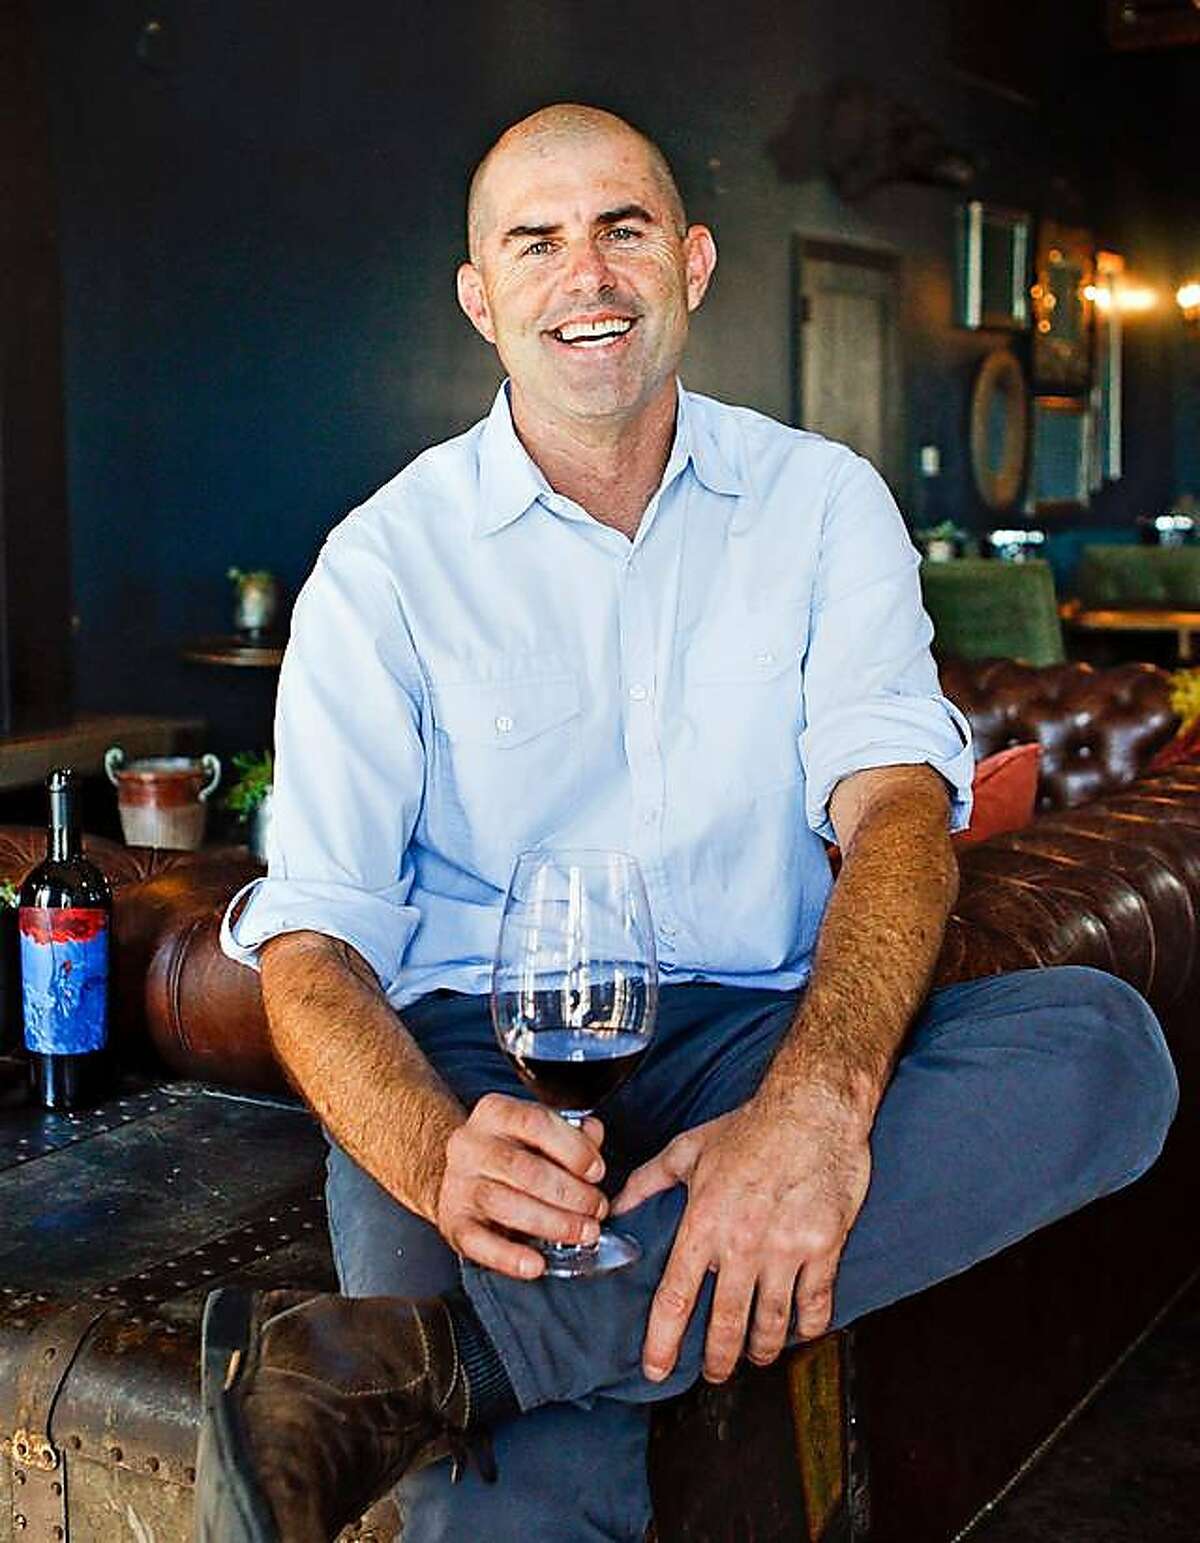 Rob Murray, a longtime vineyard manager in Paso Robles, has sold his Rabble Wines brand and will focus on his other wine brands, like Tooth & Nail.